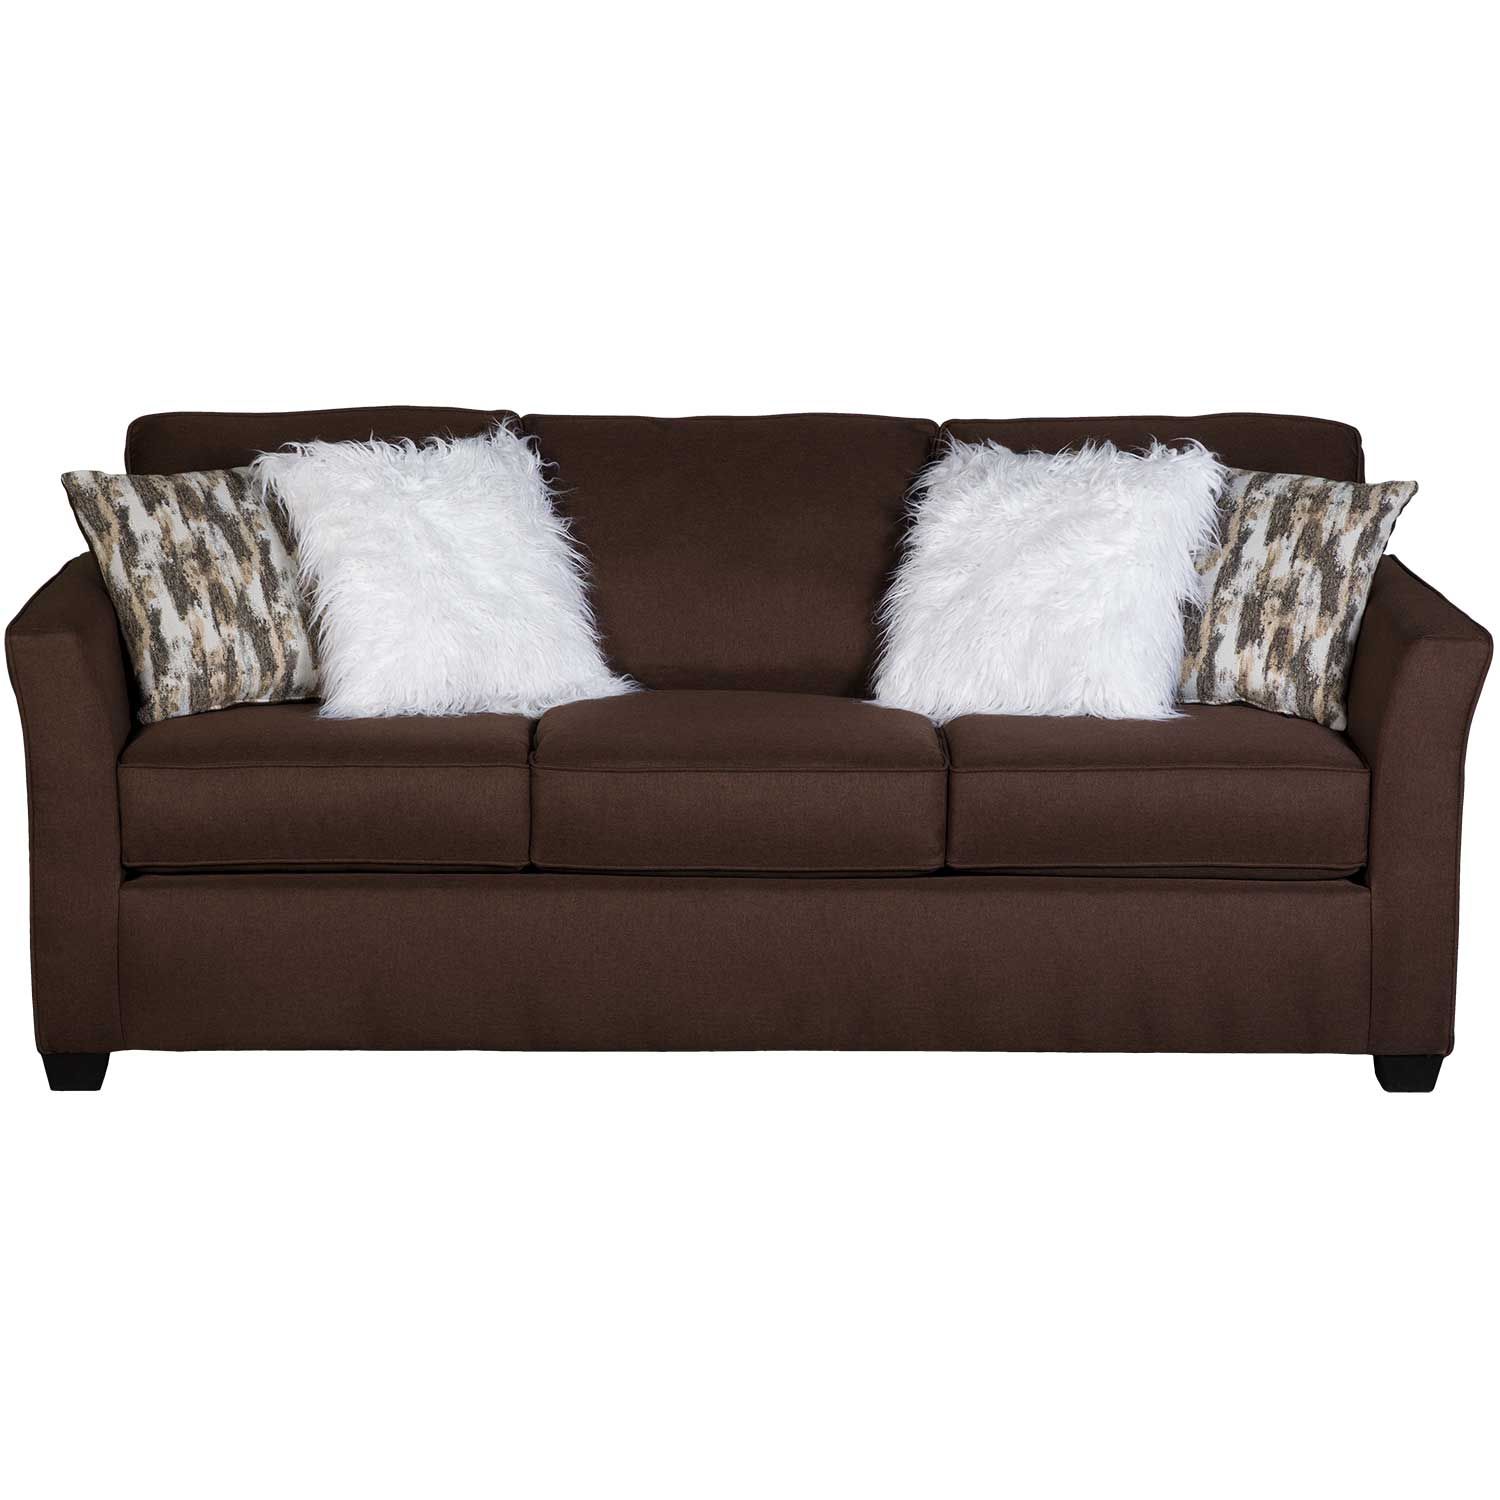 Keegan Chocolate Brown Sofa | Z 1003 | Afw Intended For Sofas In Chocolate Brown (View 4 of 15)